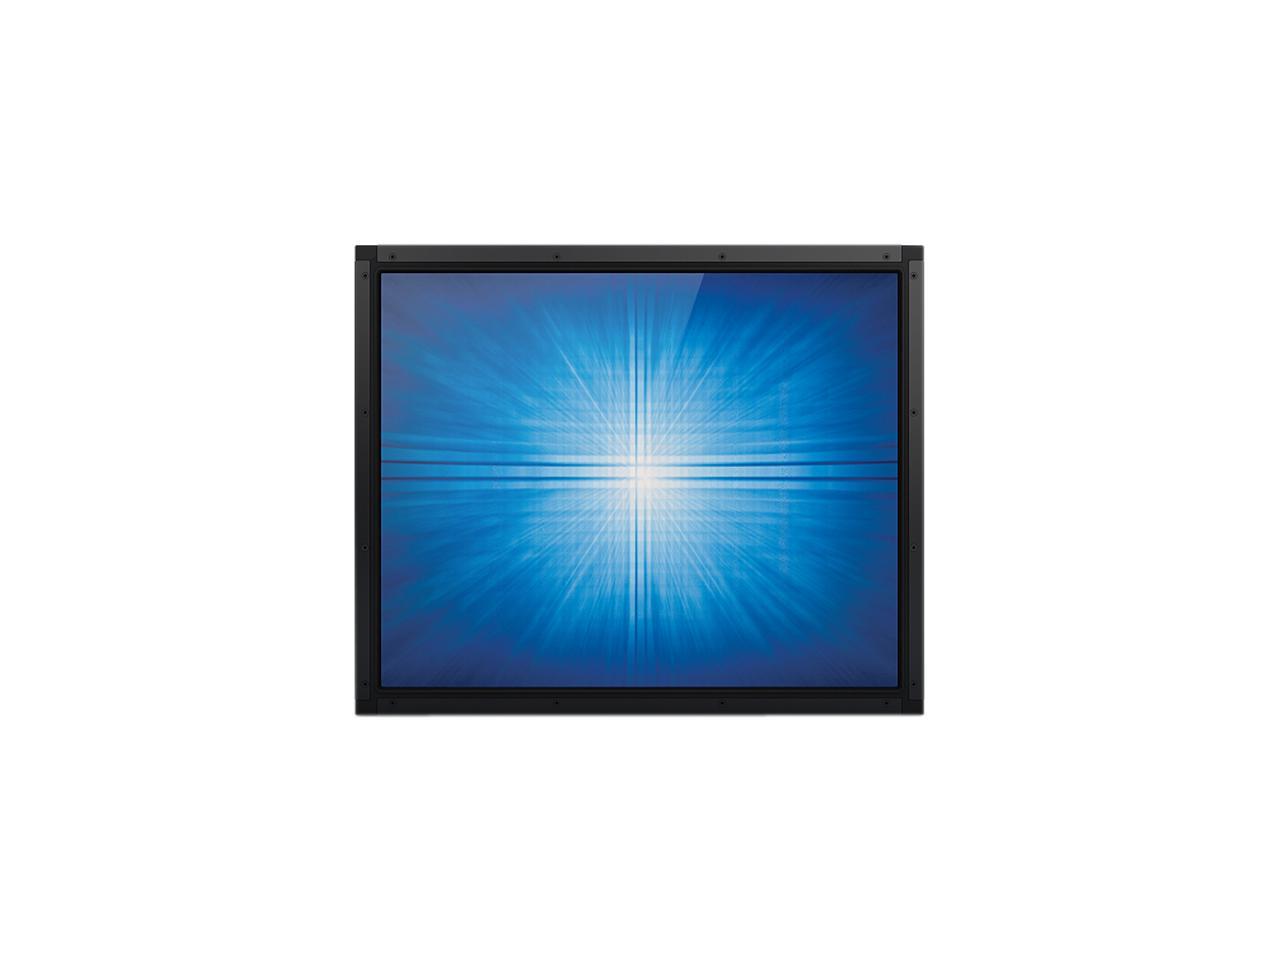 Elo E326541 1991L 19" Open-frame Commercial-grade Touchscreen Display with AccuTouch - image 1 of 5